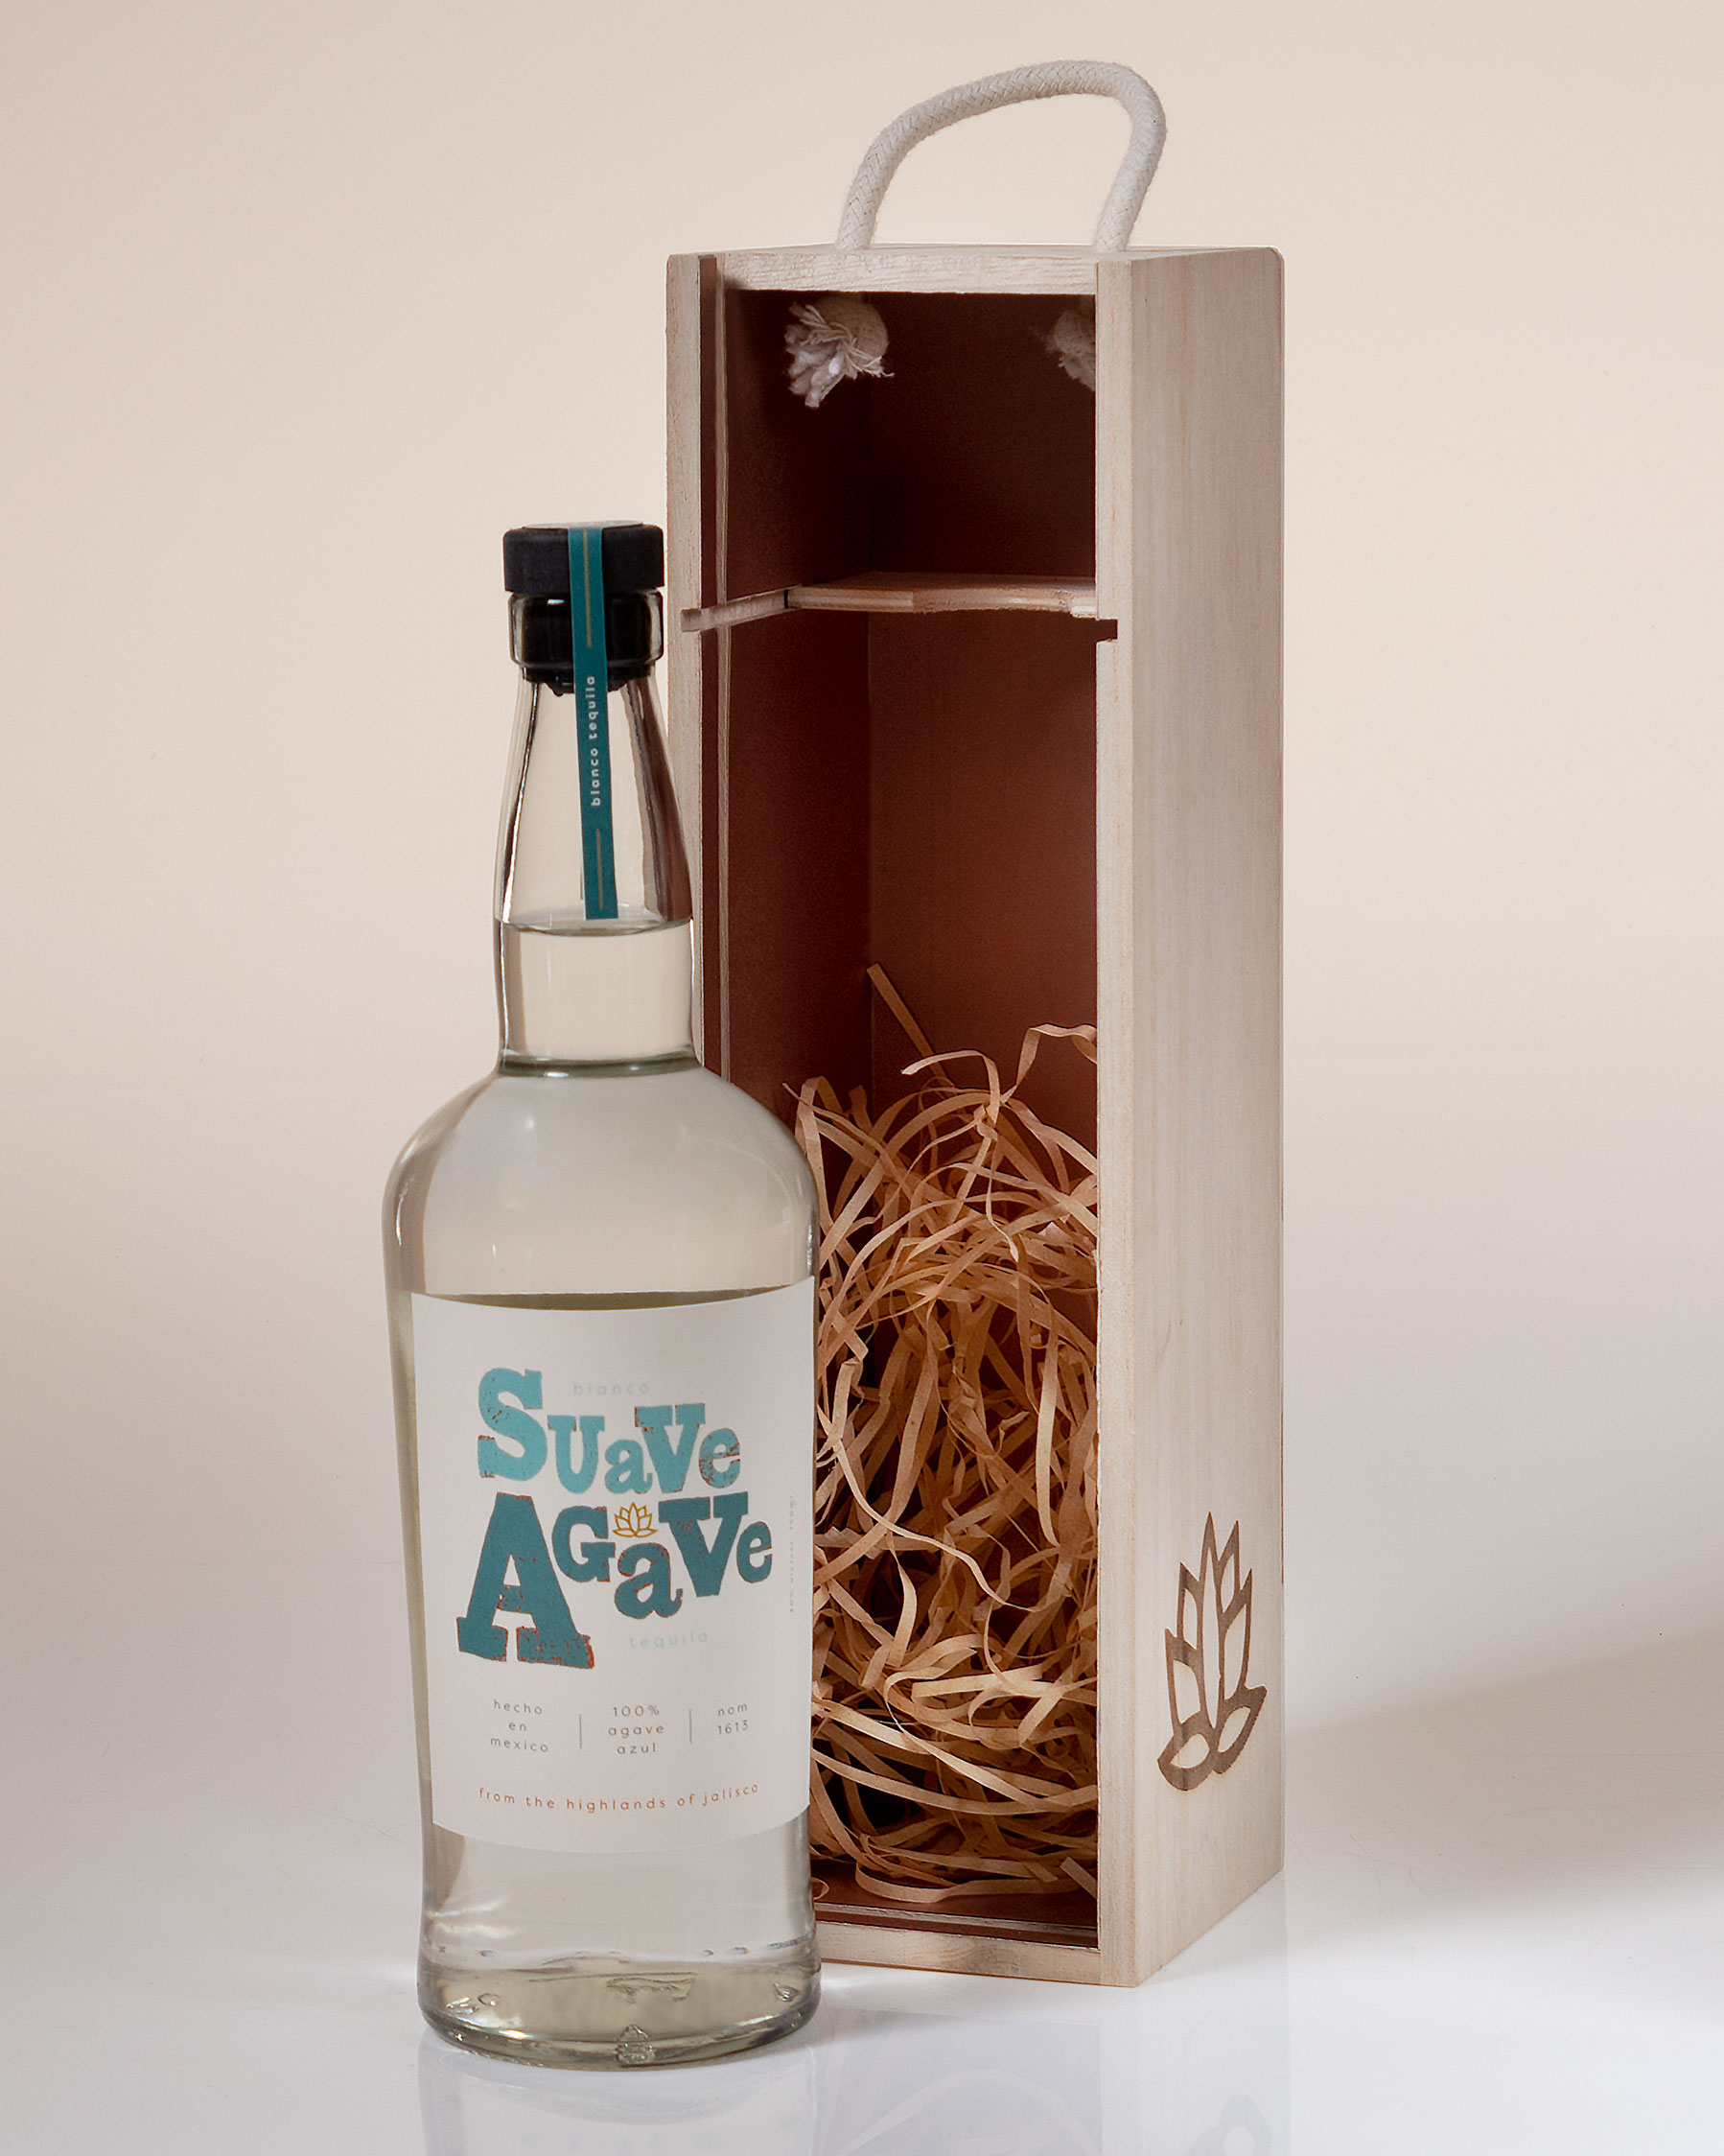 Suave Agave Tequila